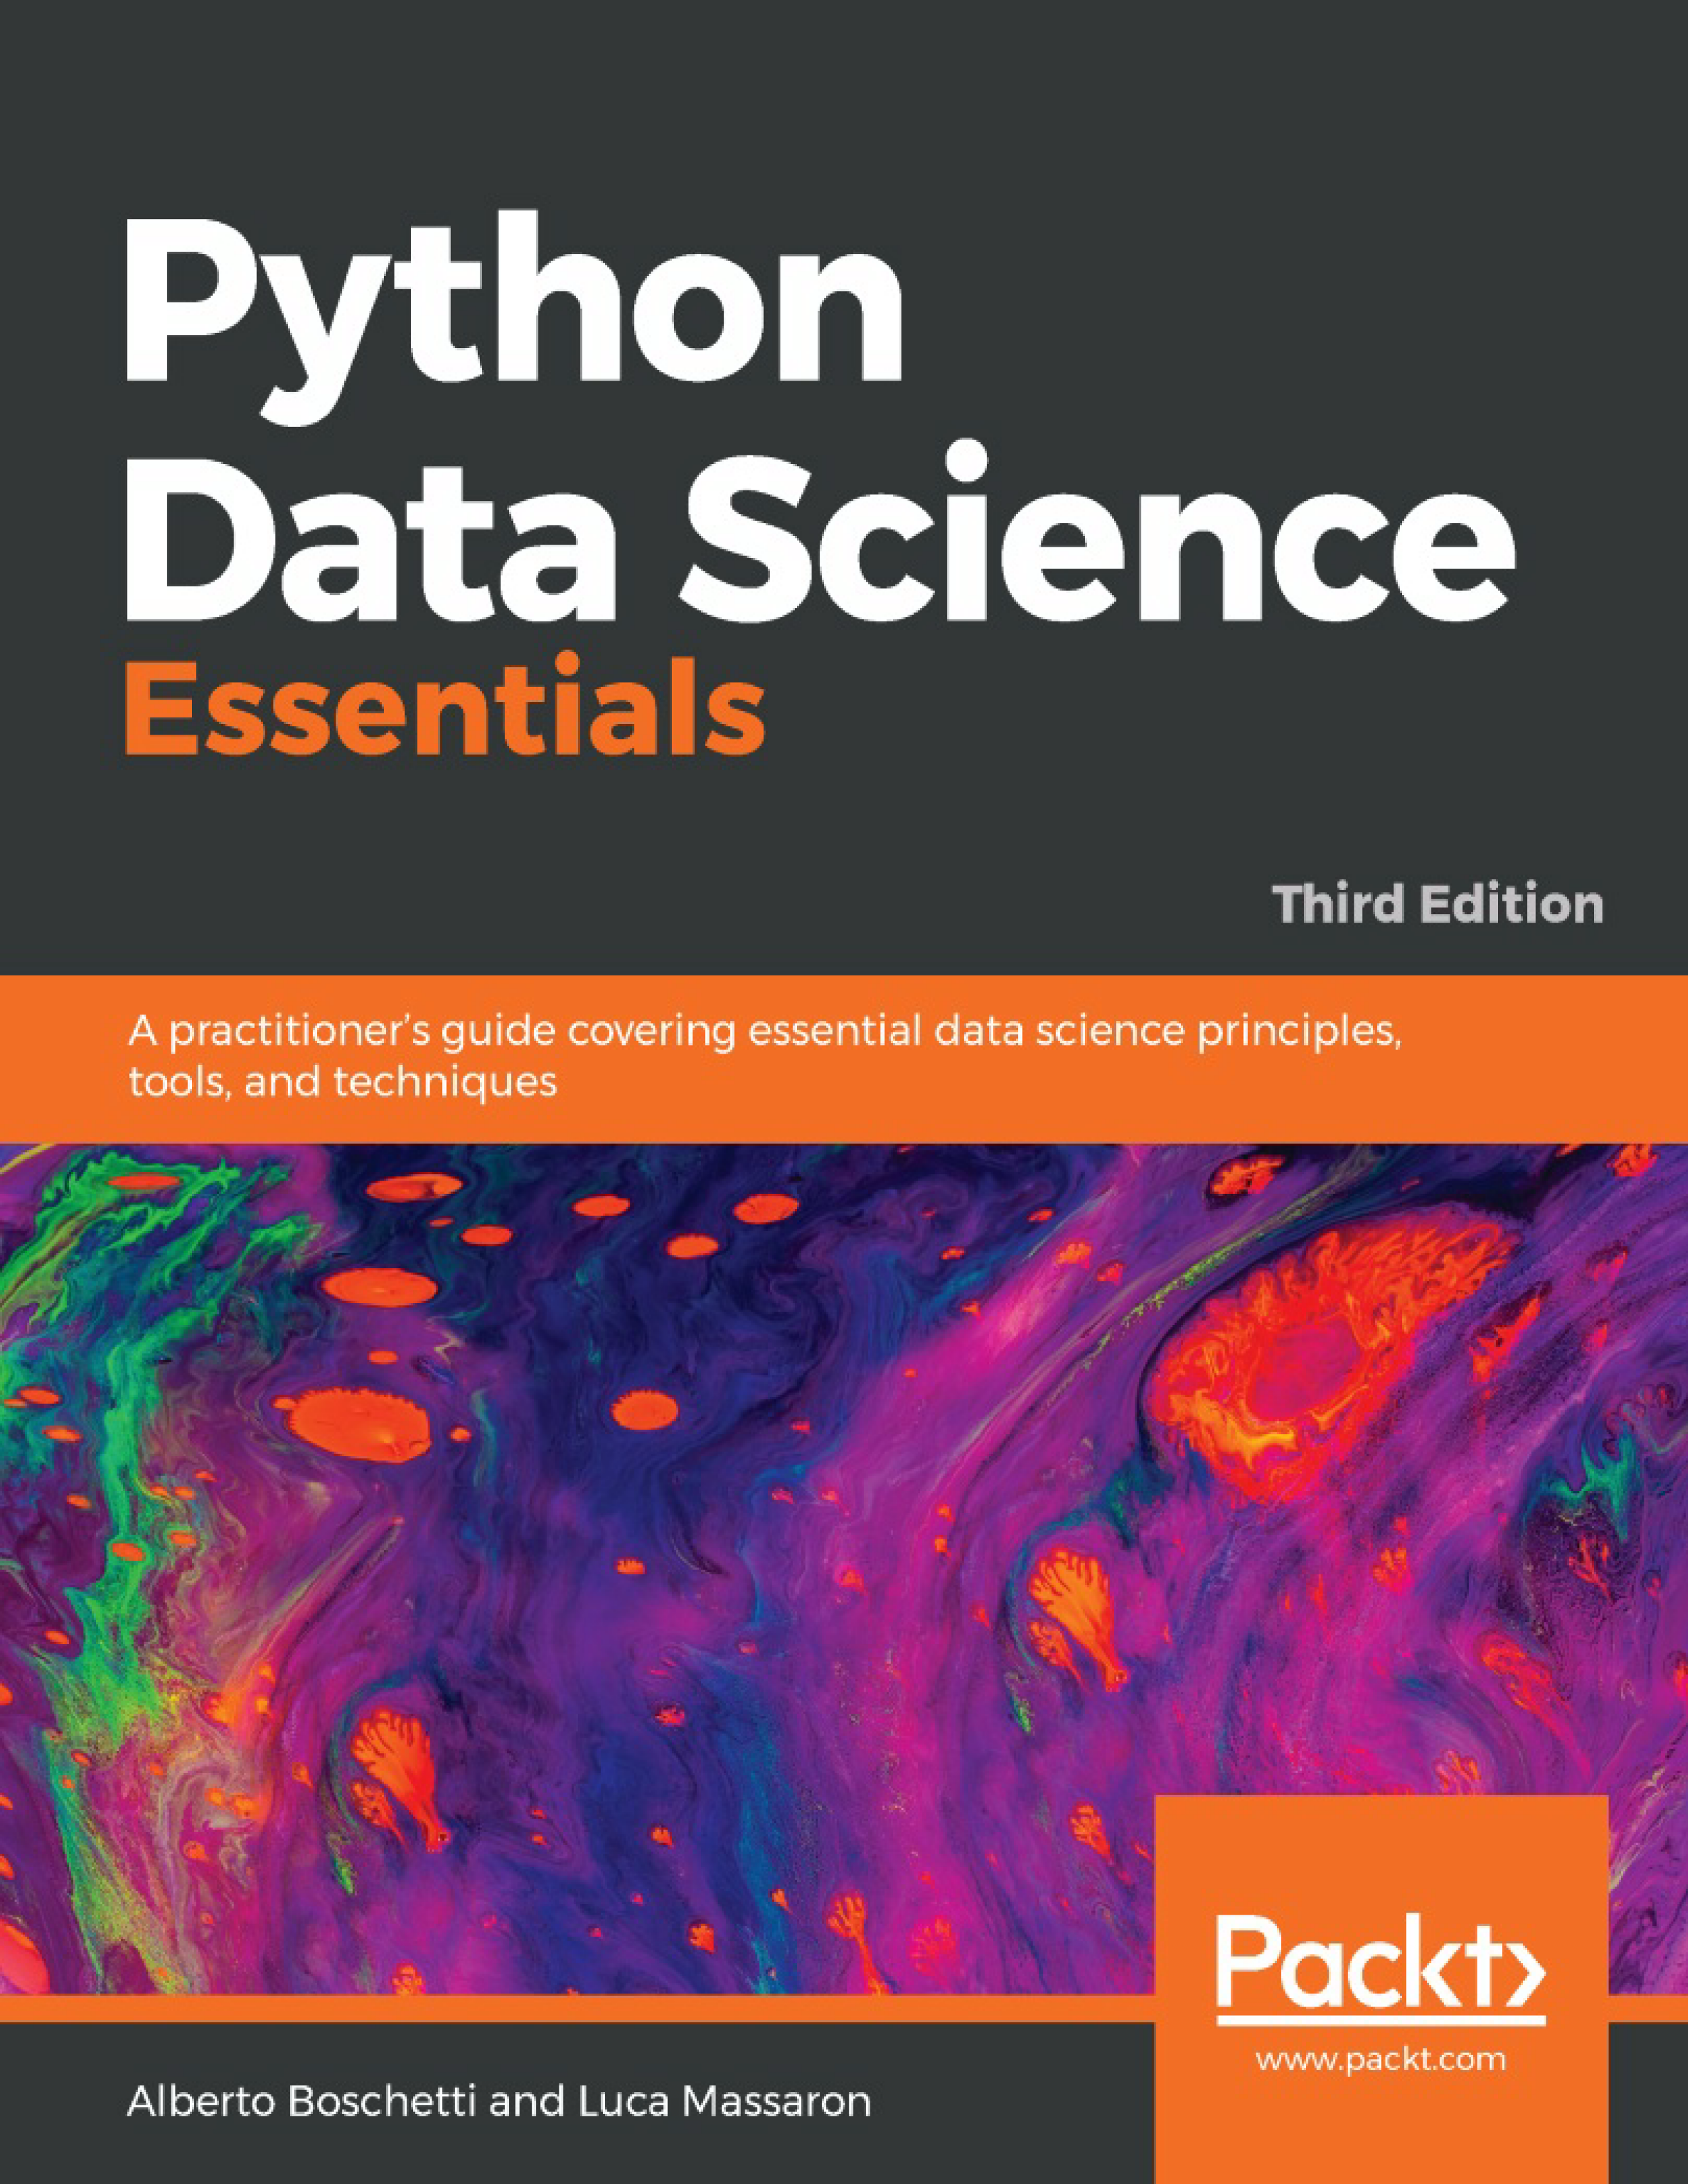 python-data-science-essentials-3rd_01.png